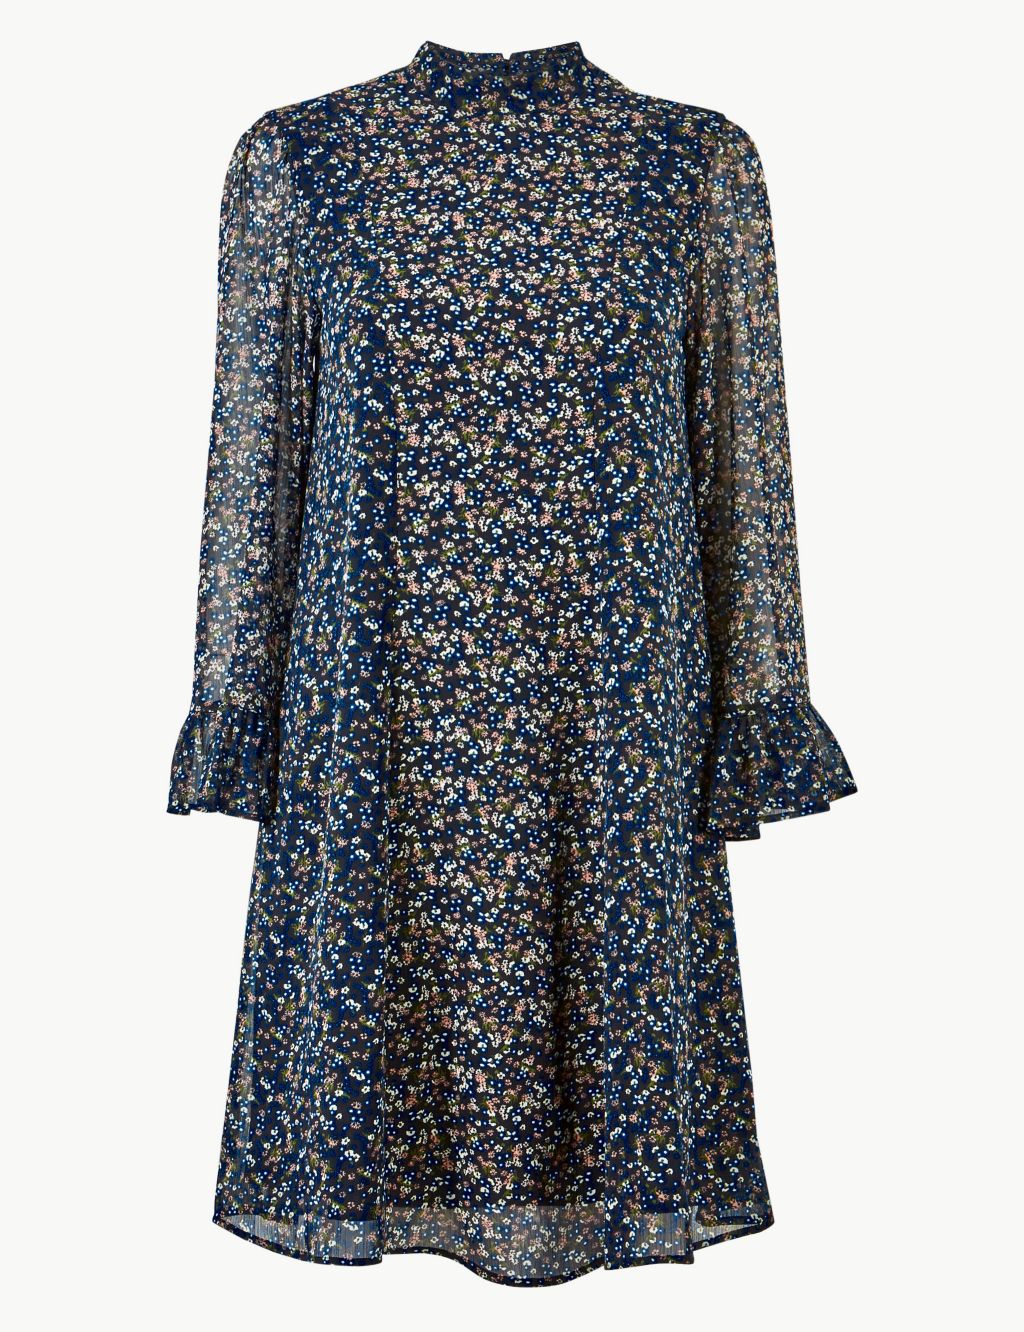 Floral Print Swing Mini Dress | M&S Collection | M&S